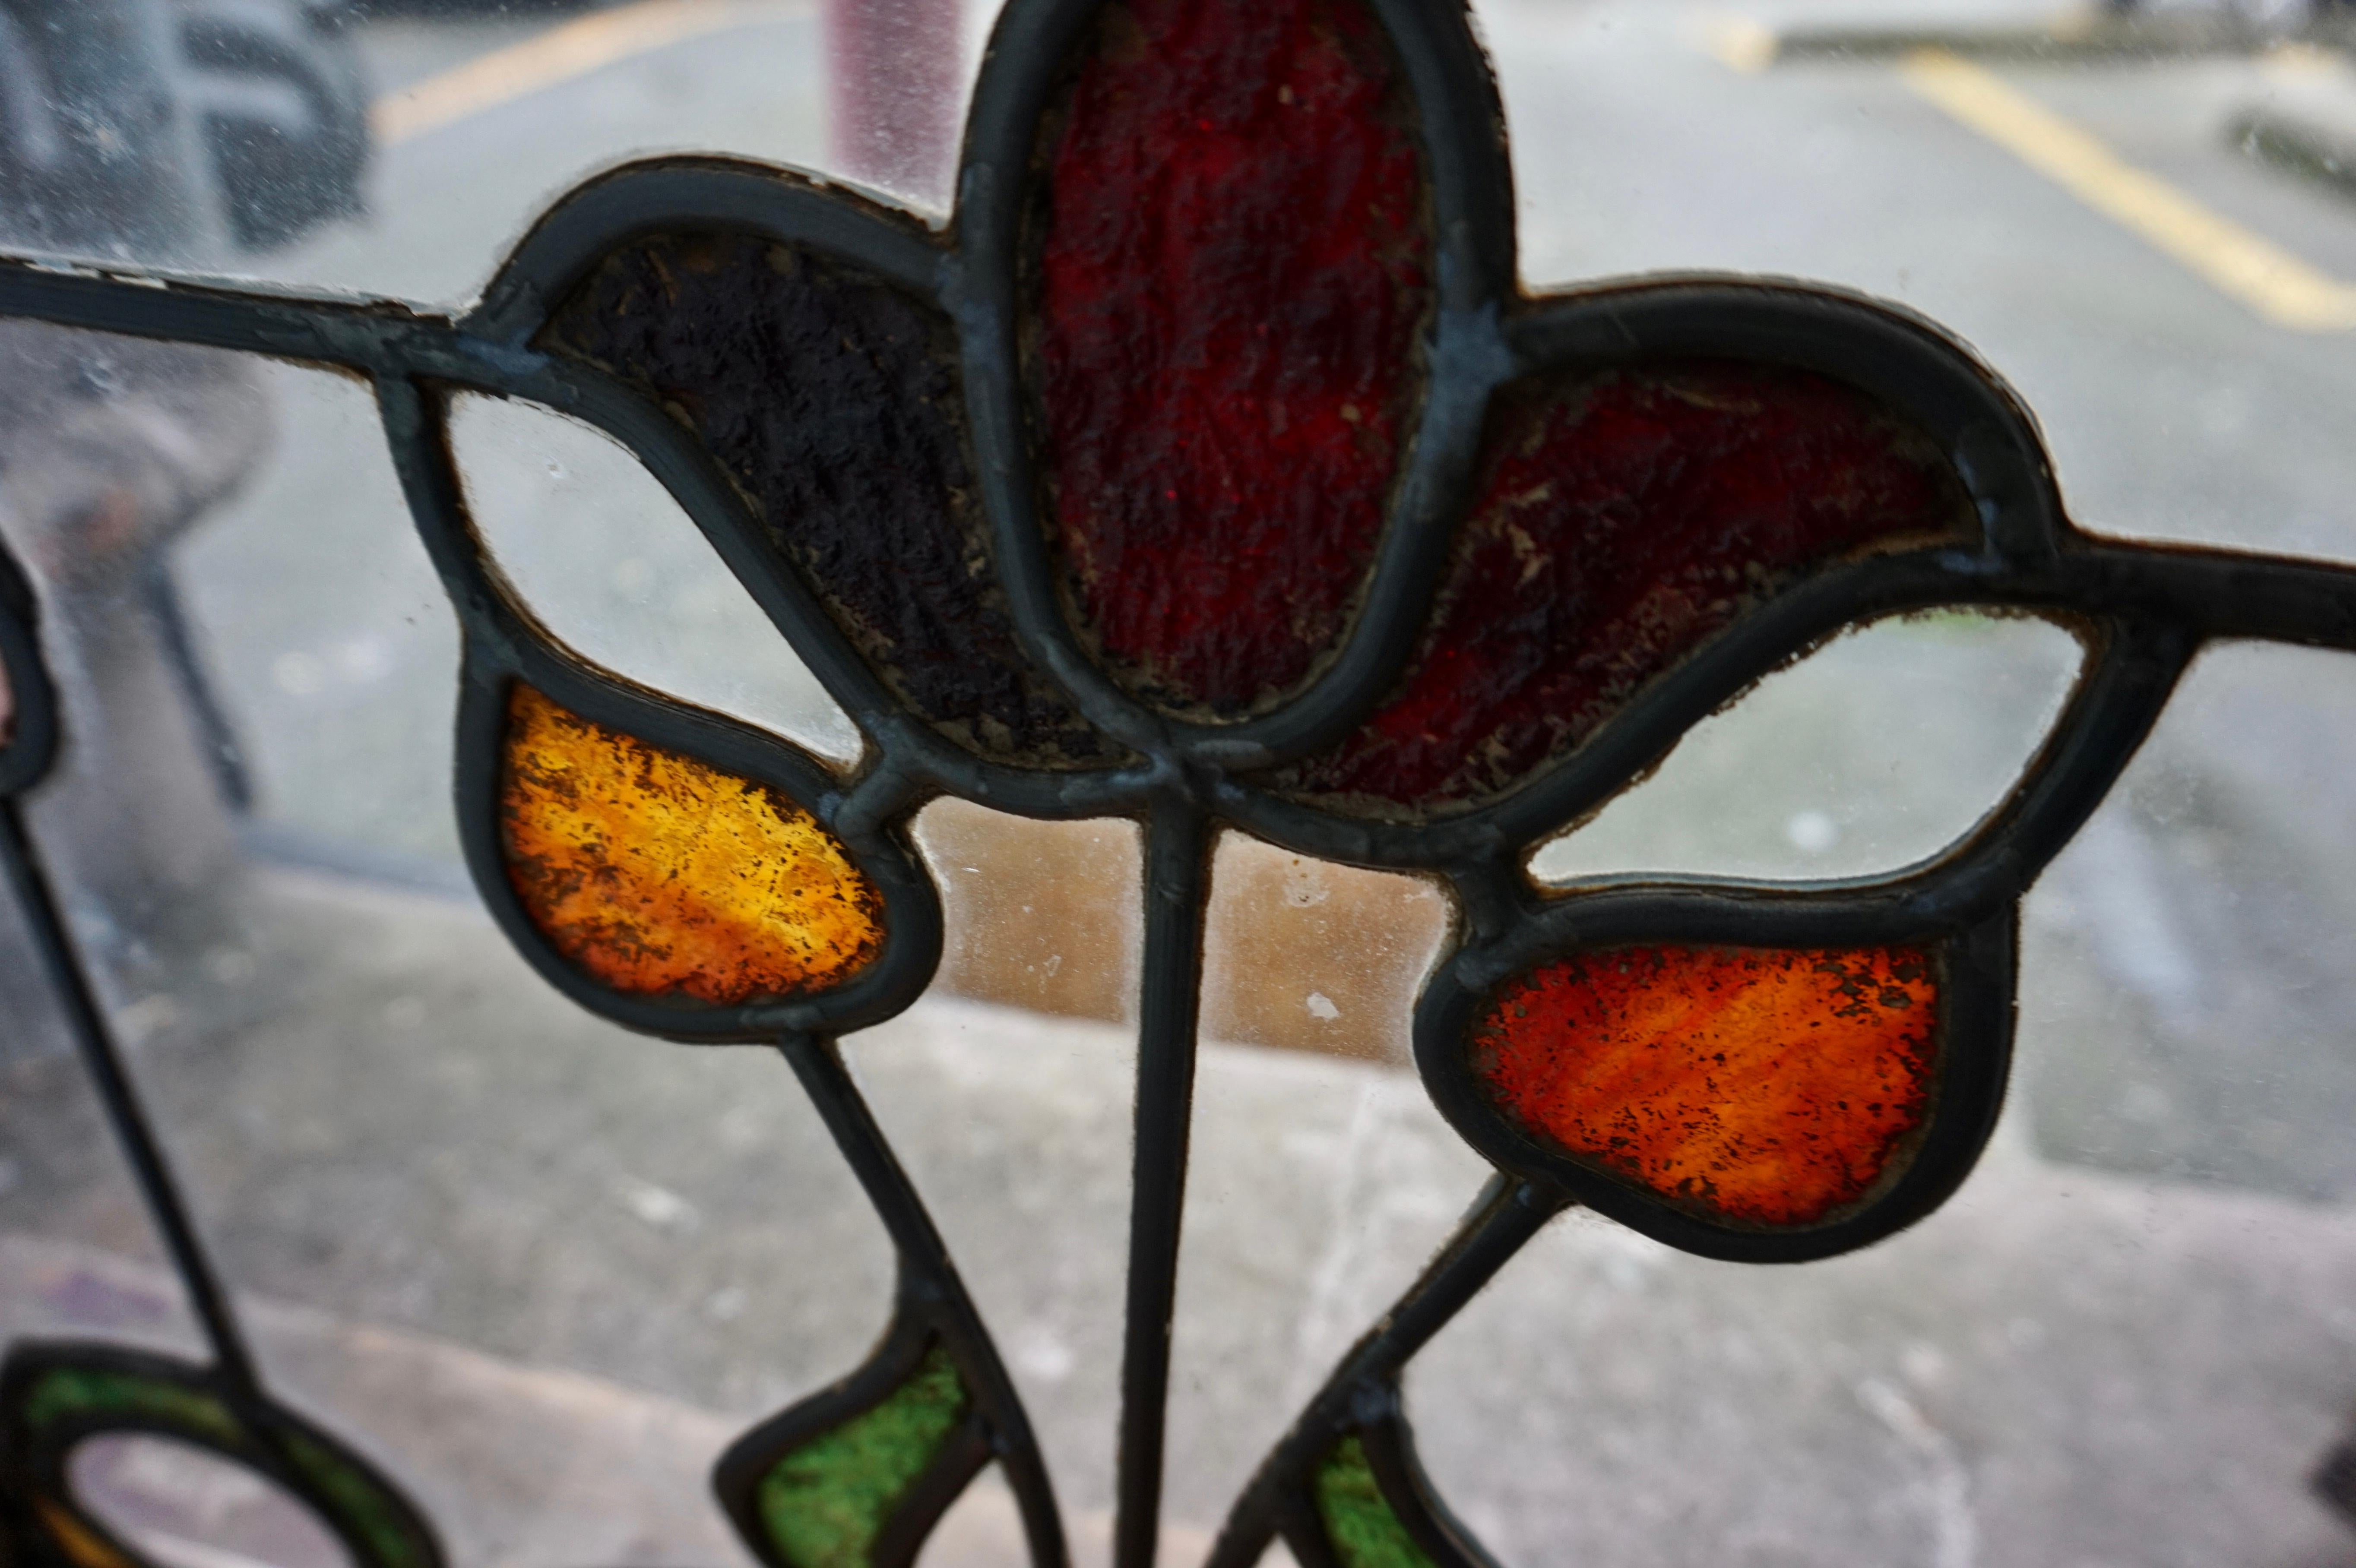 English Pair Of Rare Art Nouveau Stain Glass Windows With Scrolling Tulip & Bud Motif For Sale